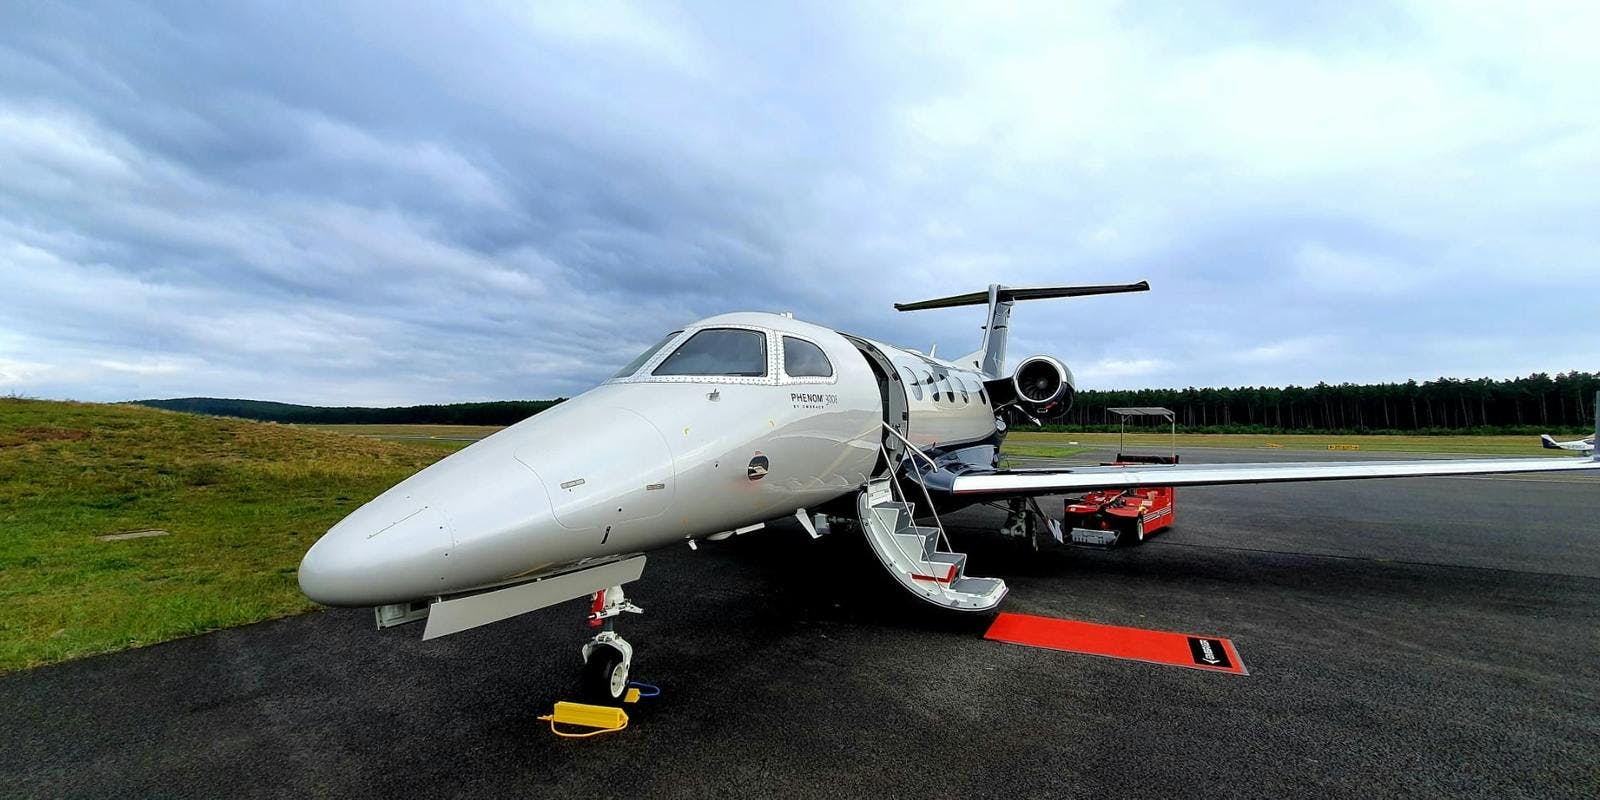 airfield airport aircraft airplane transportation vehicle jet